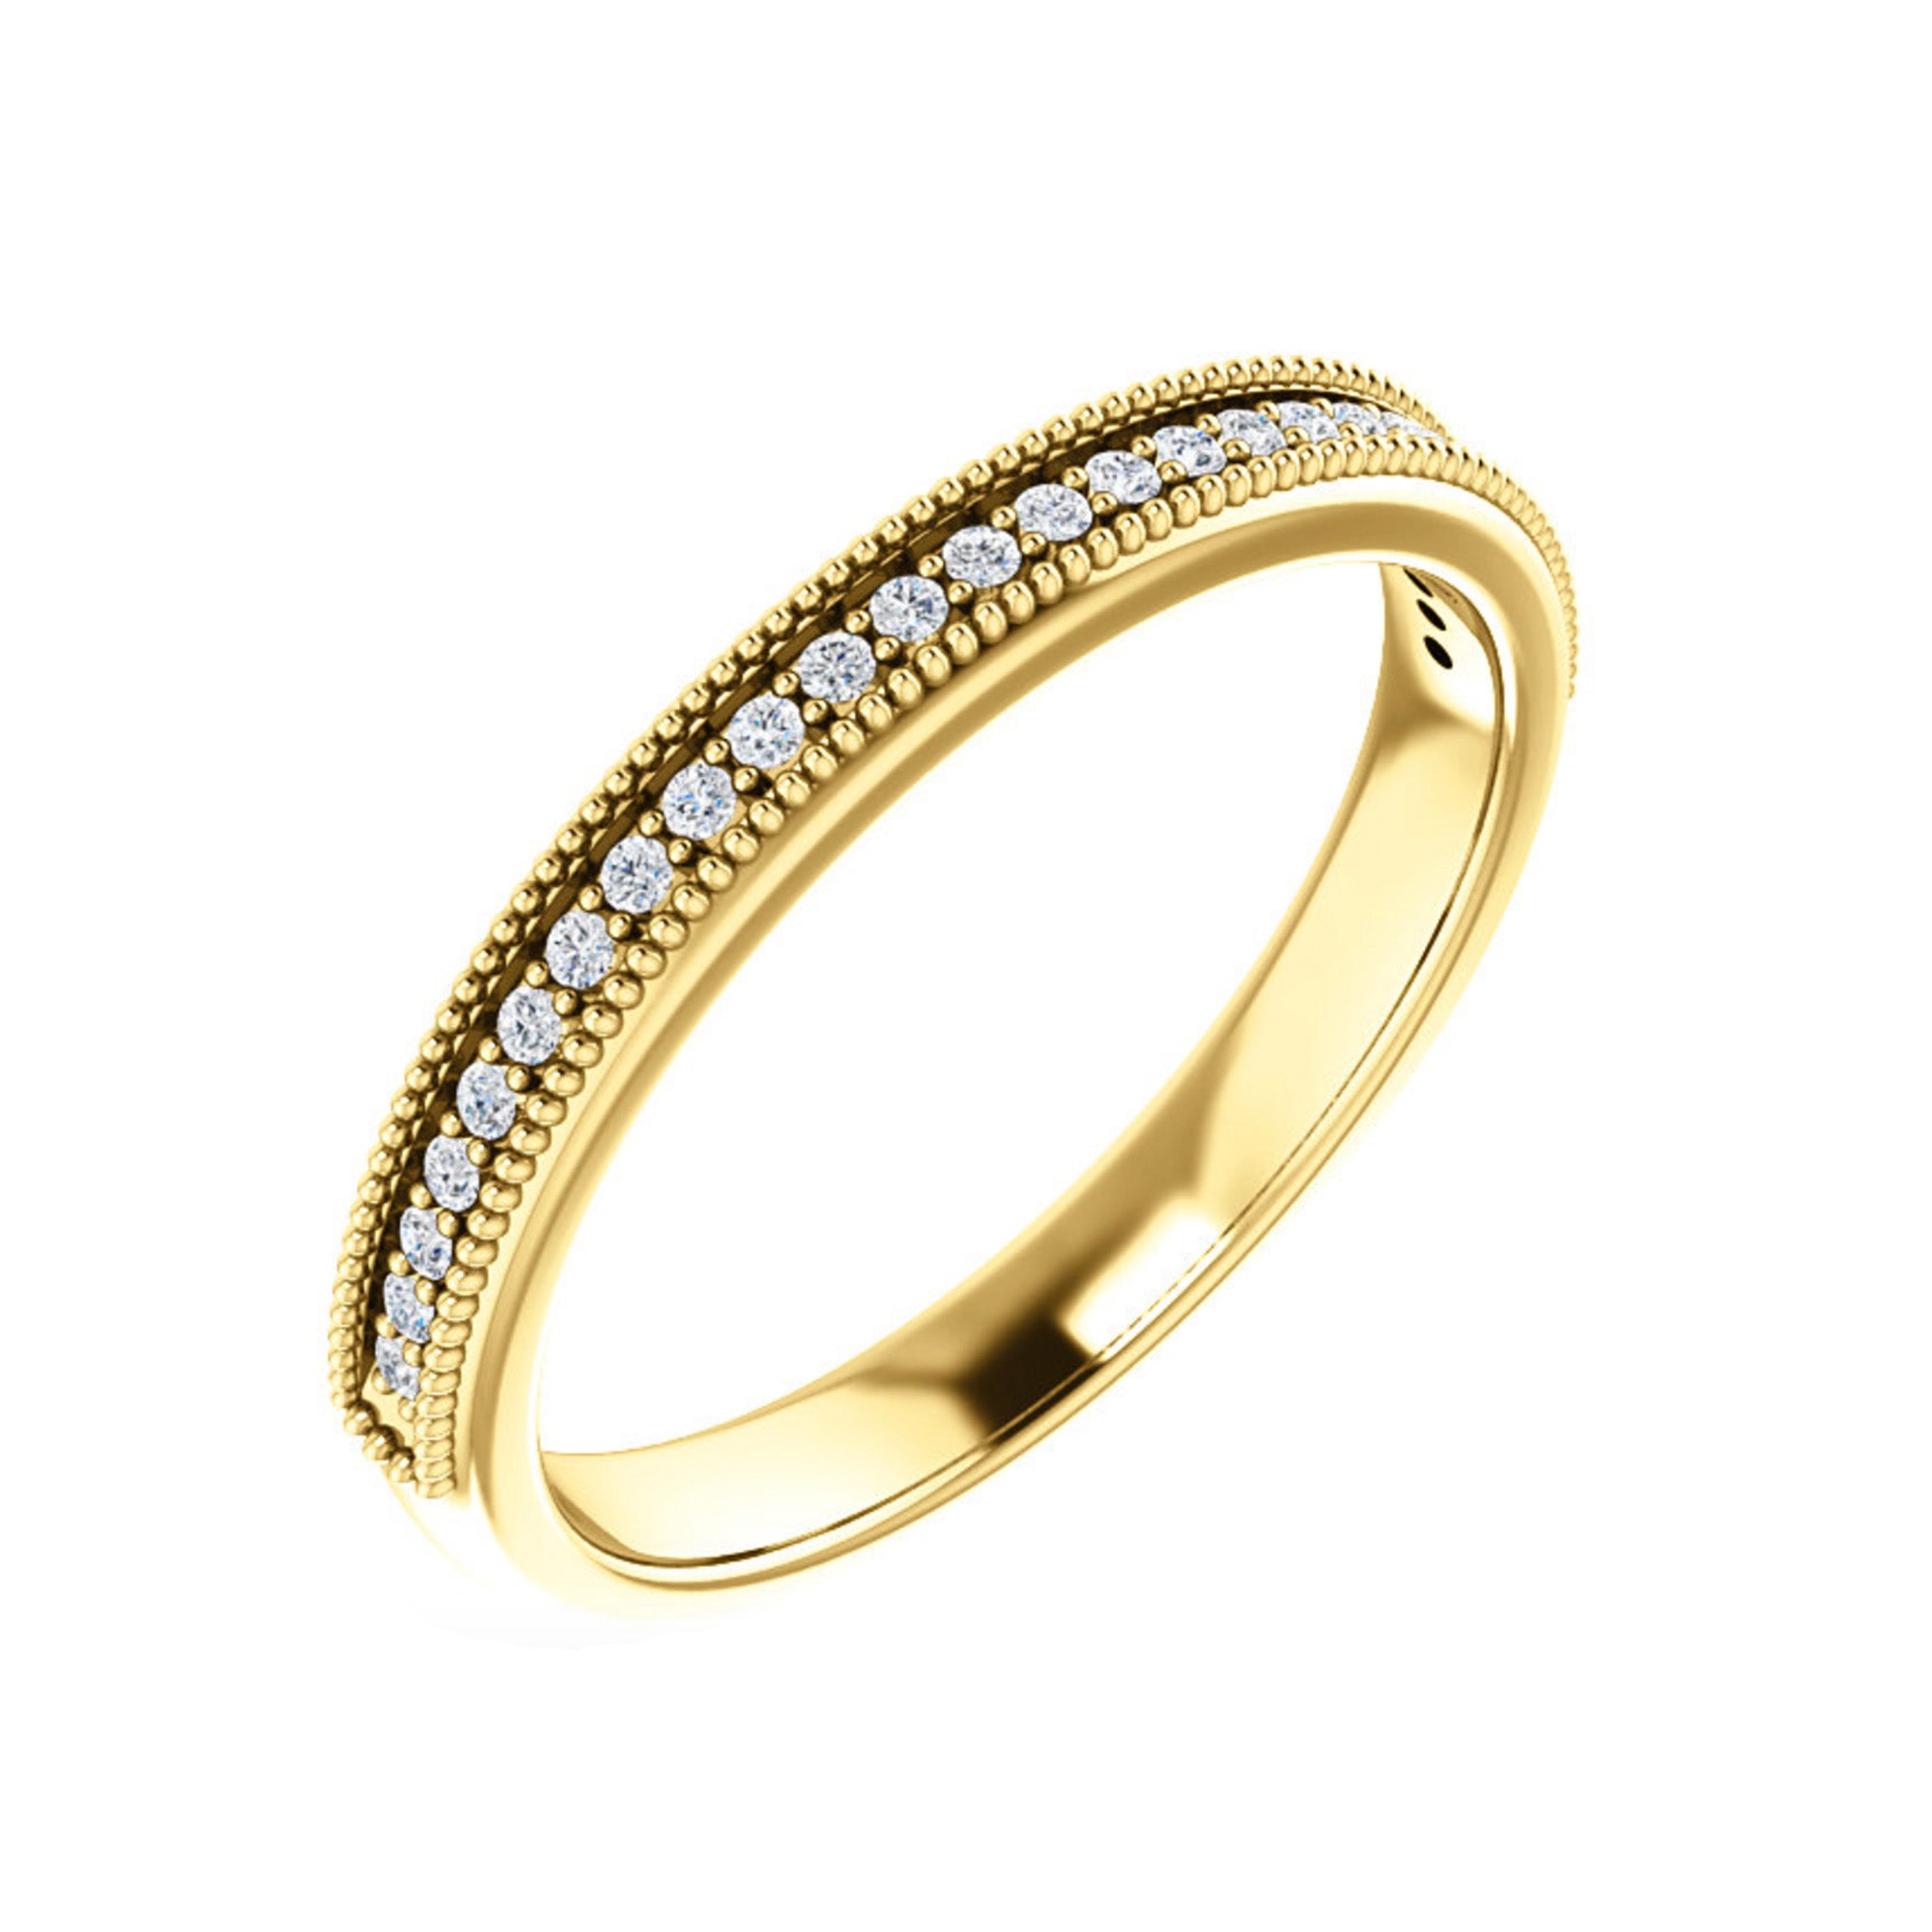 Beaded Milgrain Diamond Stack Band in White, Yellow or Rose Gold - Talisman Collection Fine Jewelers